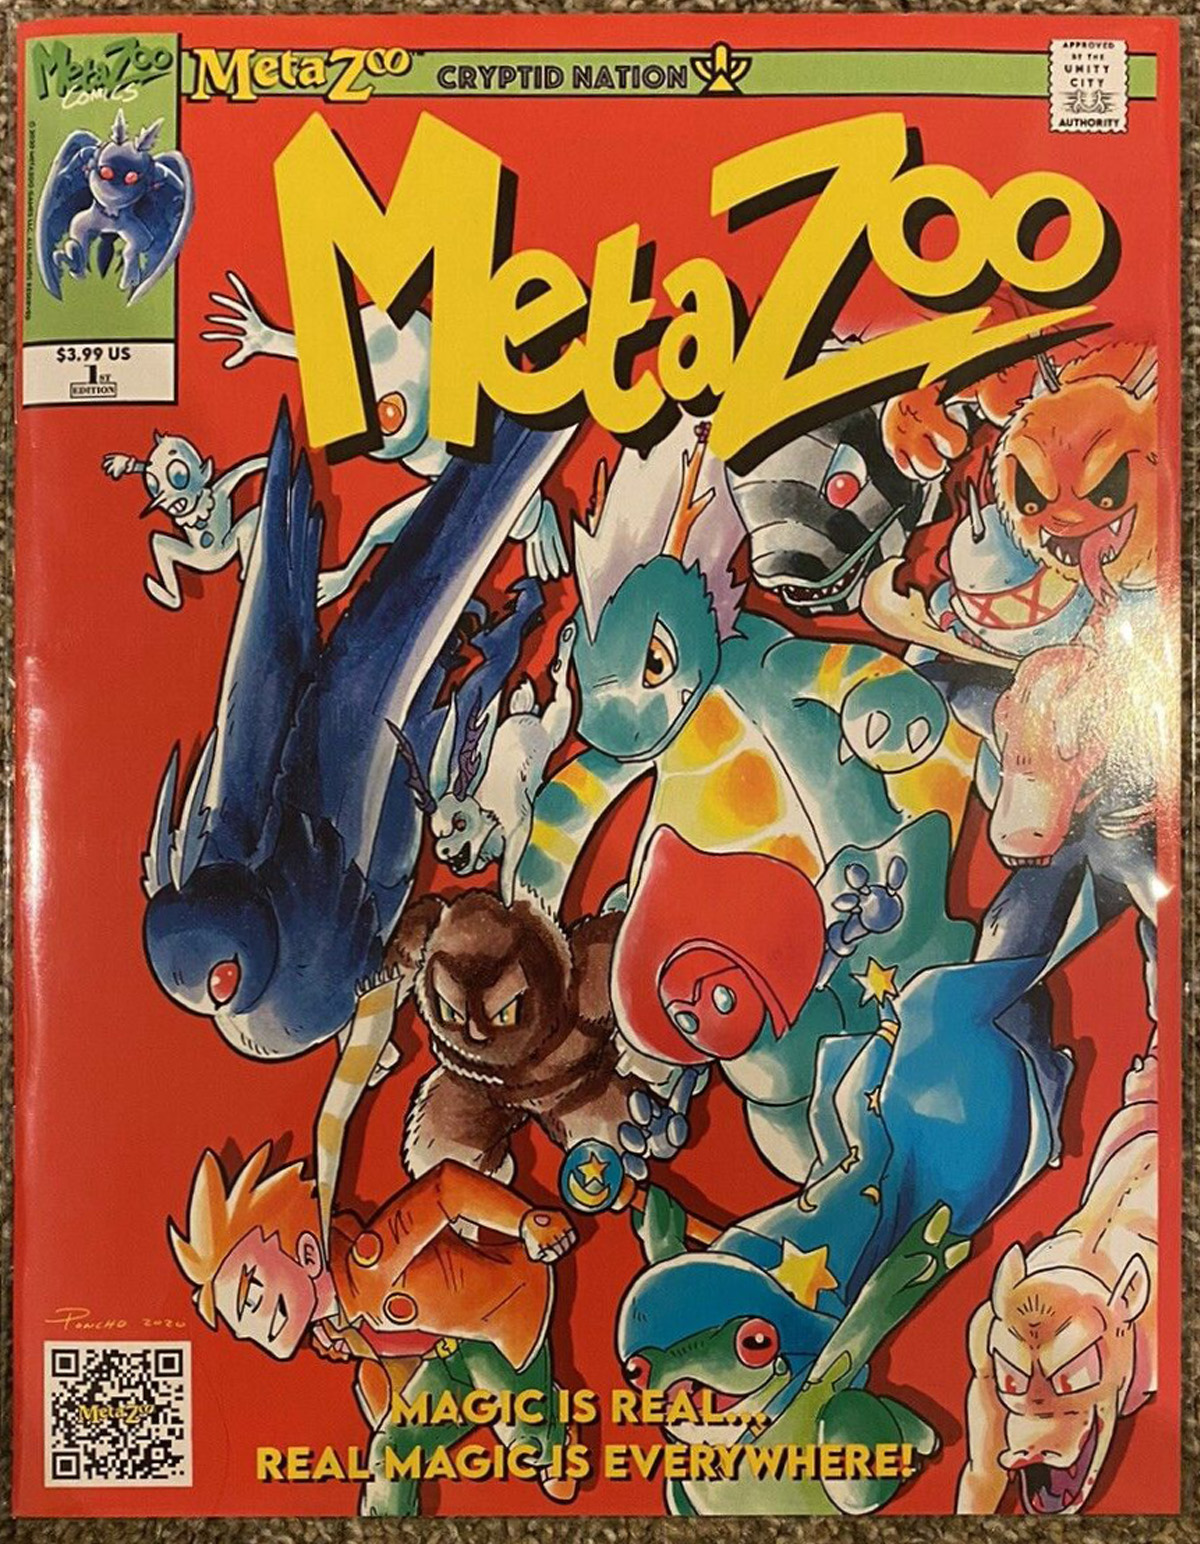 MetaZoo Illustrated Novel - Chapter 1 Print 1 - Front